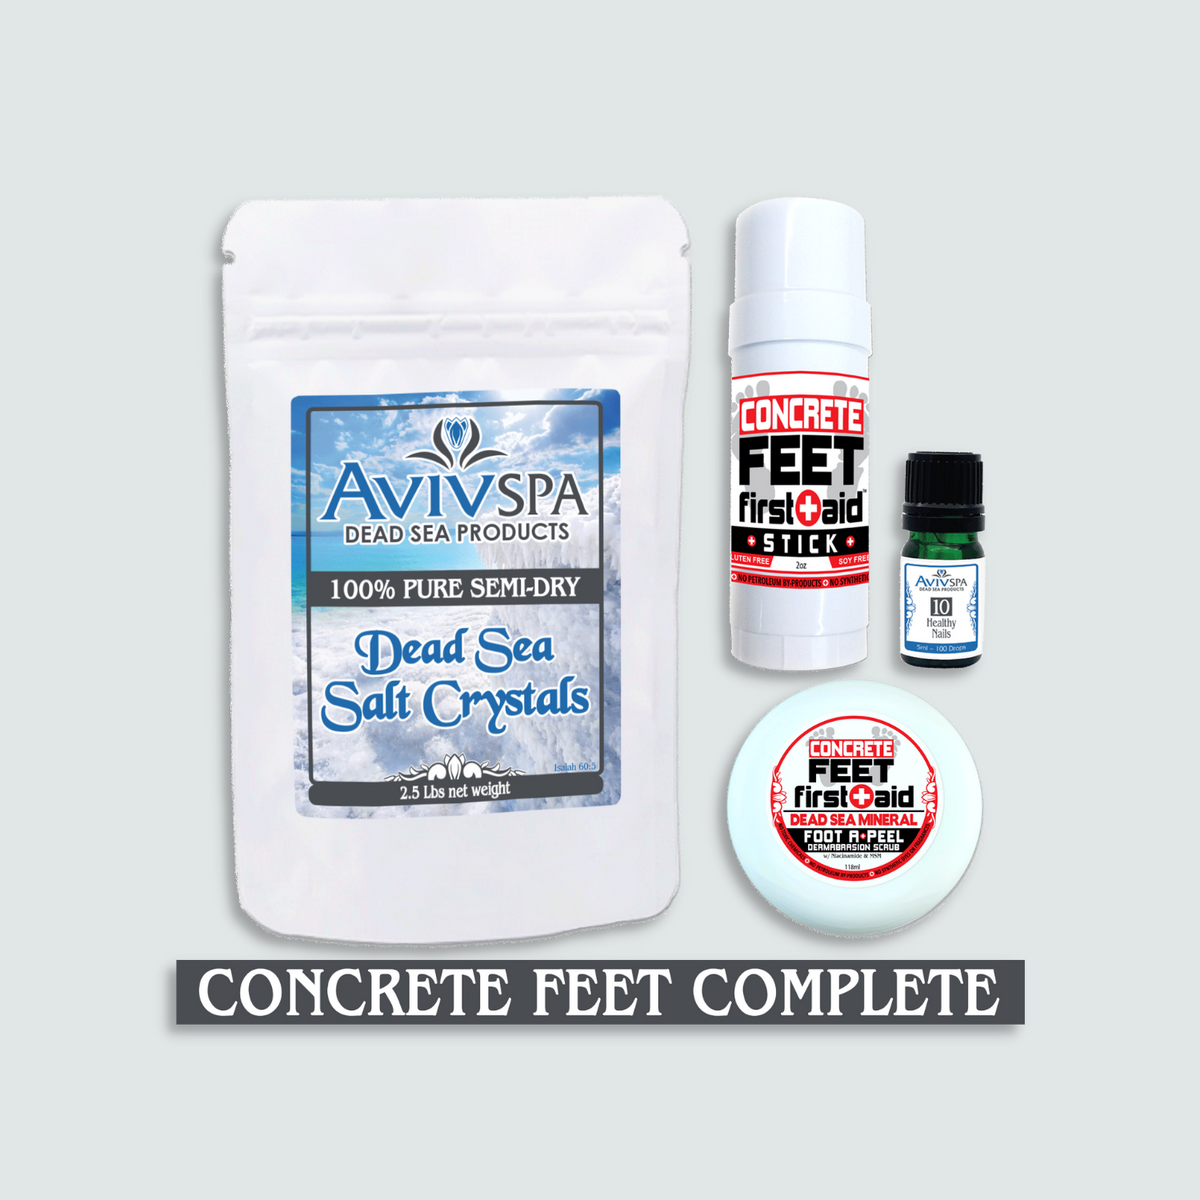 First Aid Kit for Dry, Cracked, Splitting heels, feet and toes